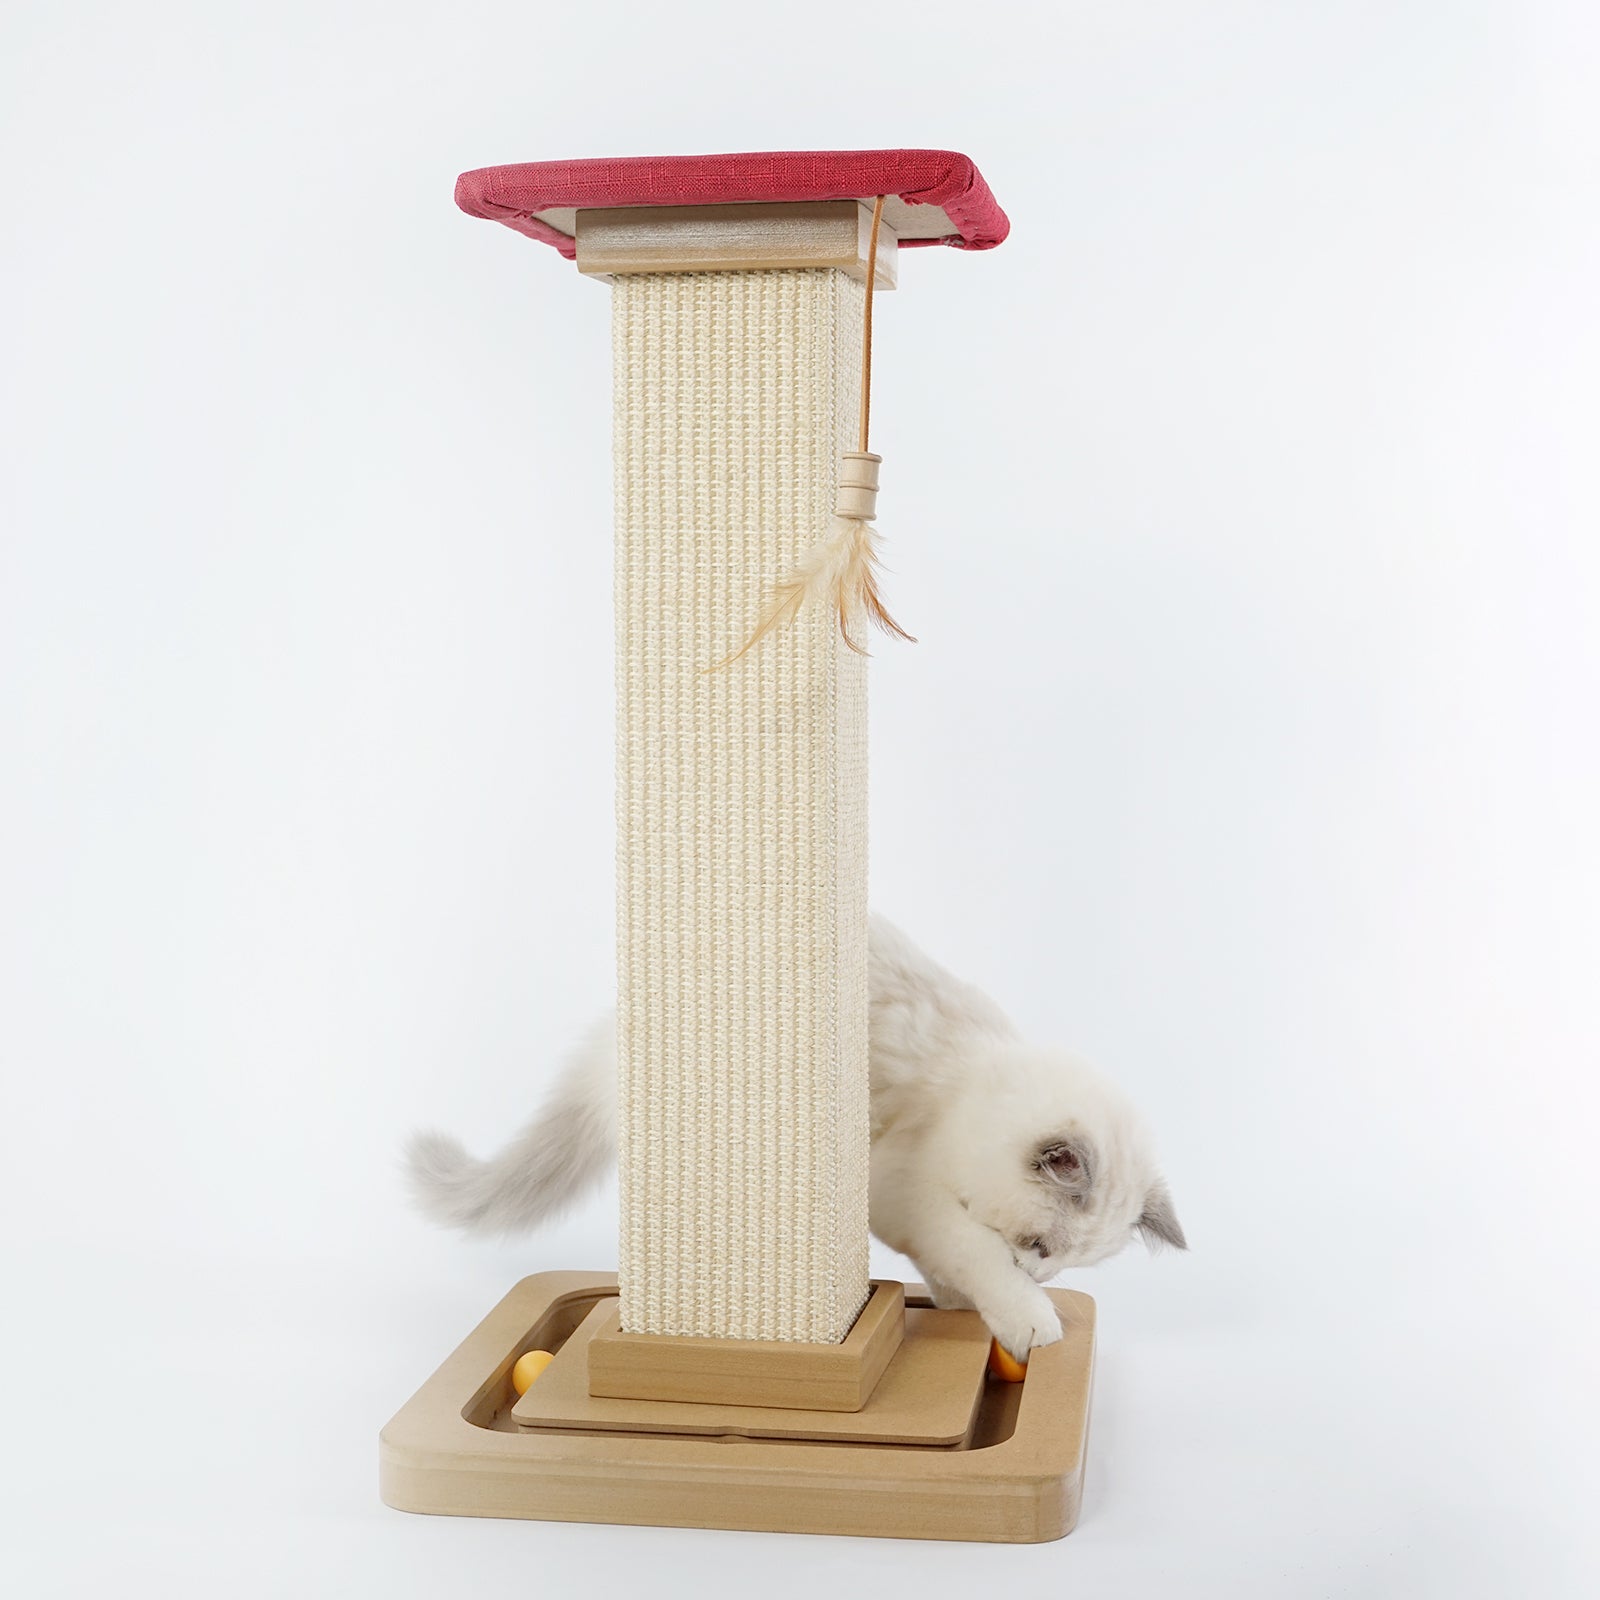 Innopet Cat Post, Cat Scratching Posts for Indoor Cats, 25" Tall & 13" Wide, Made of Sisal, Multifunctional Cat Scratchers with Cats' favorite Toys, Best Home Playground for Your Cats